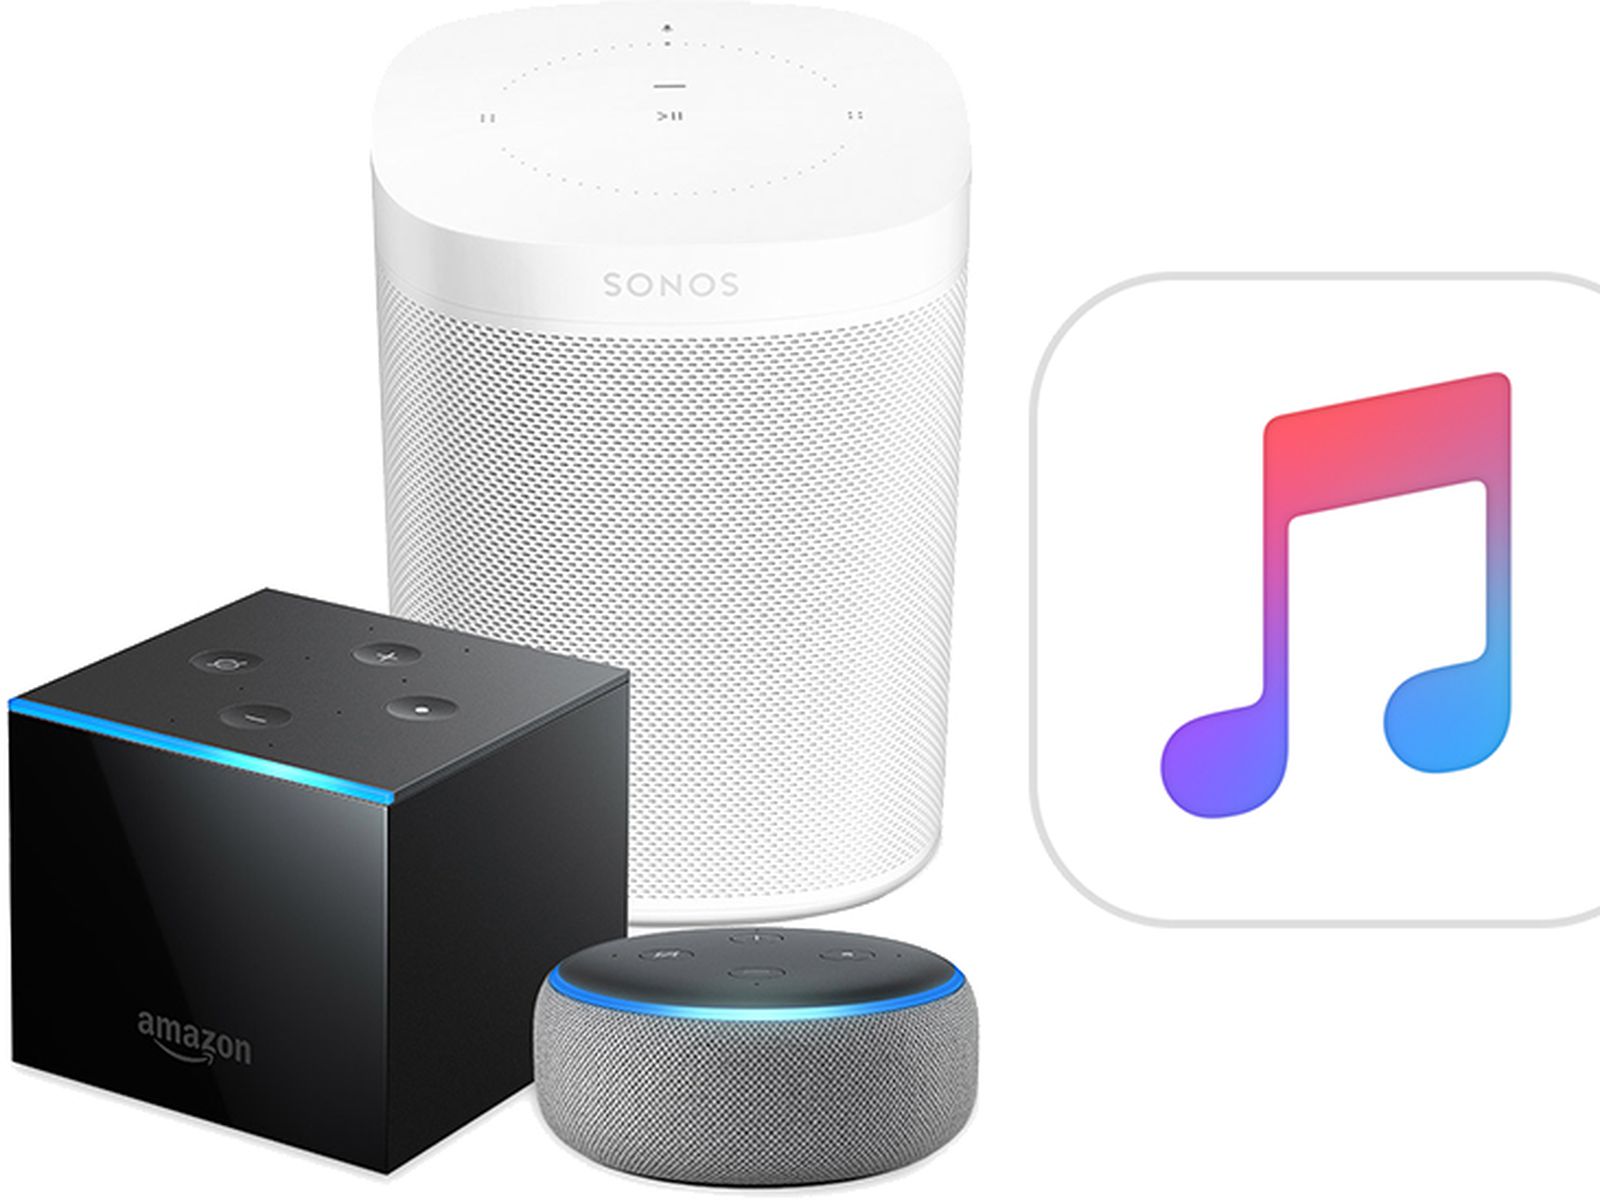 Alexa Now Apple Music in Australia and New Zealand on Echo, Sonos, and TV Devices - MacRumors